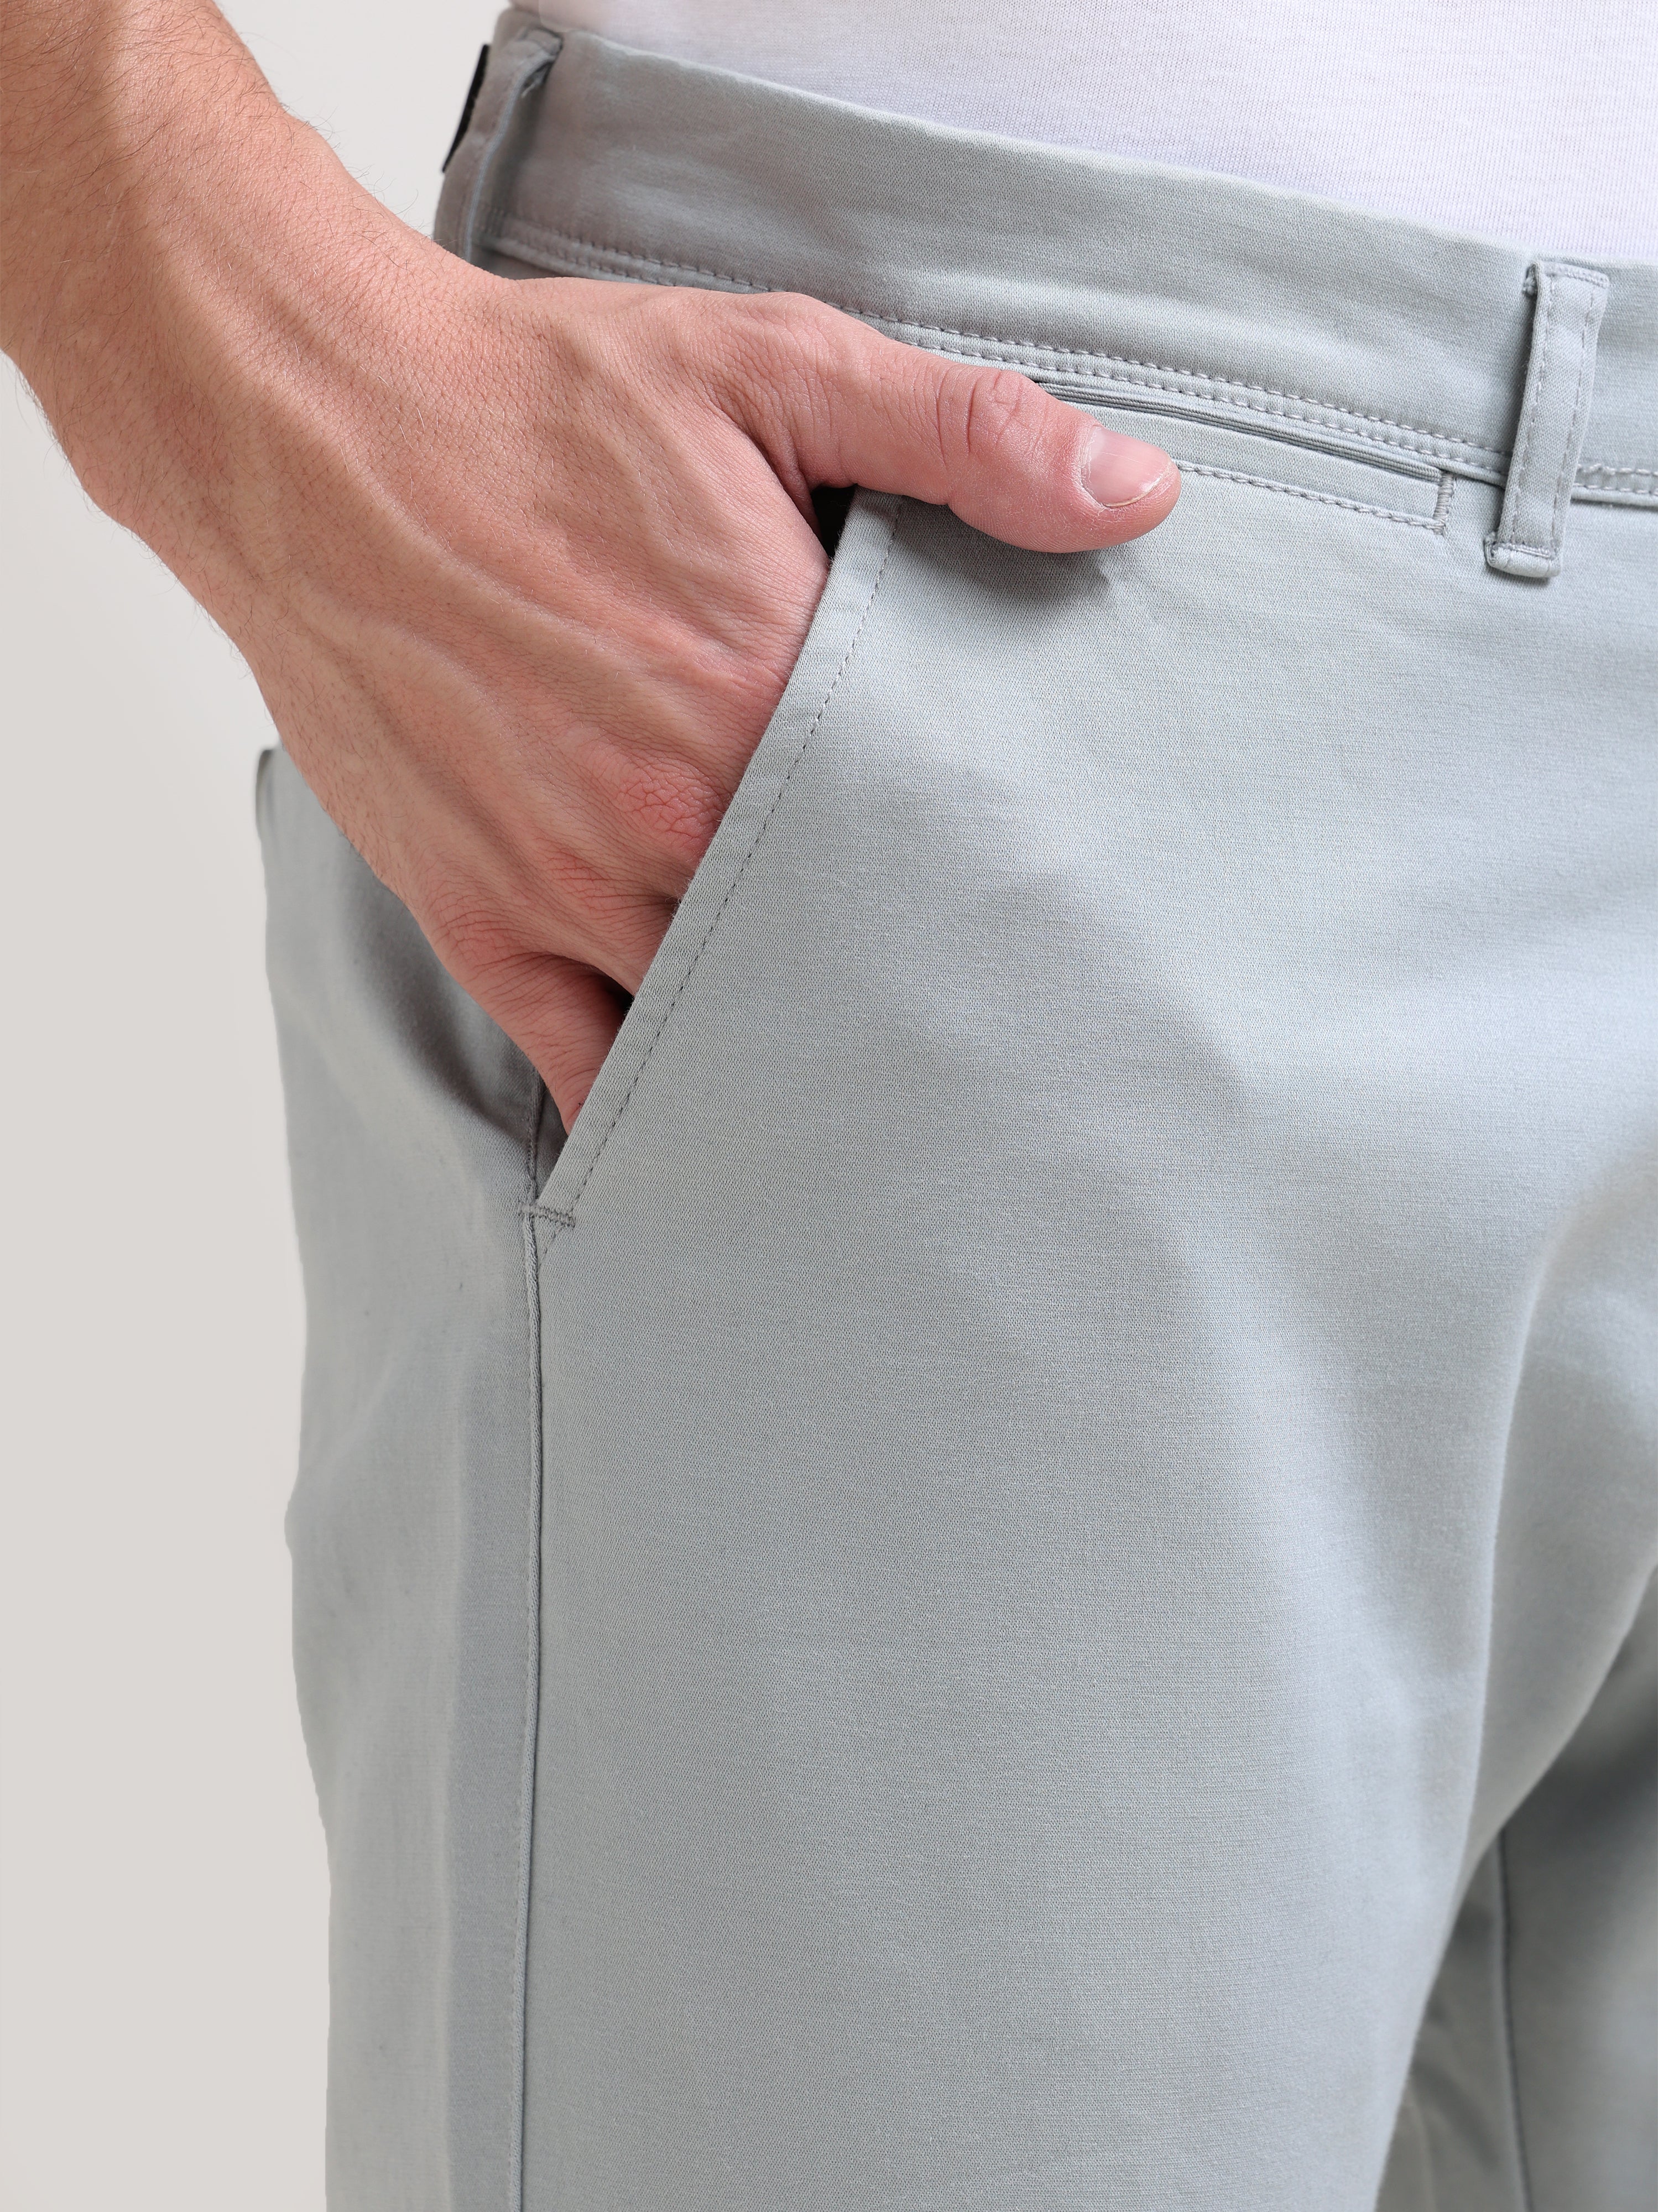 Teal Ease: Solid Comfort Fit Cotton Pants